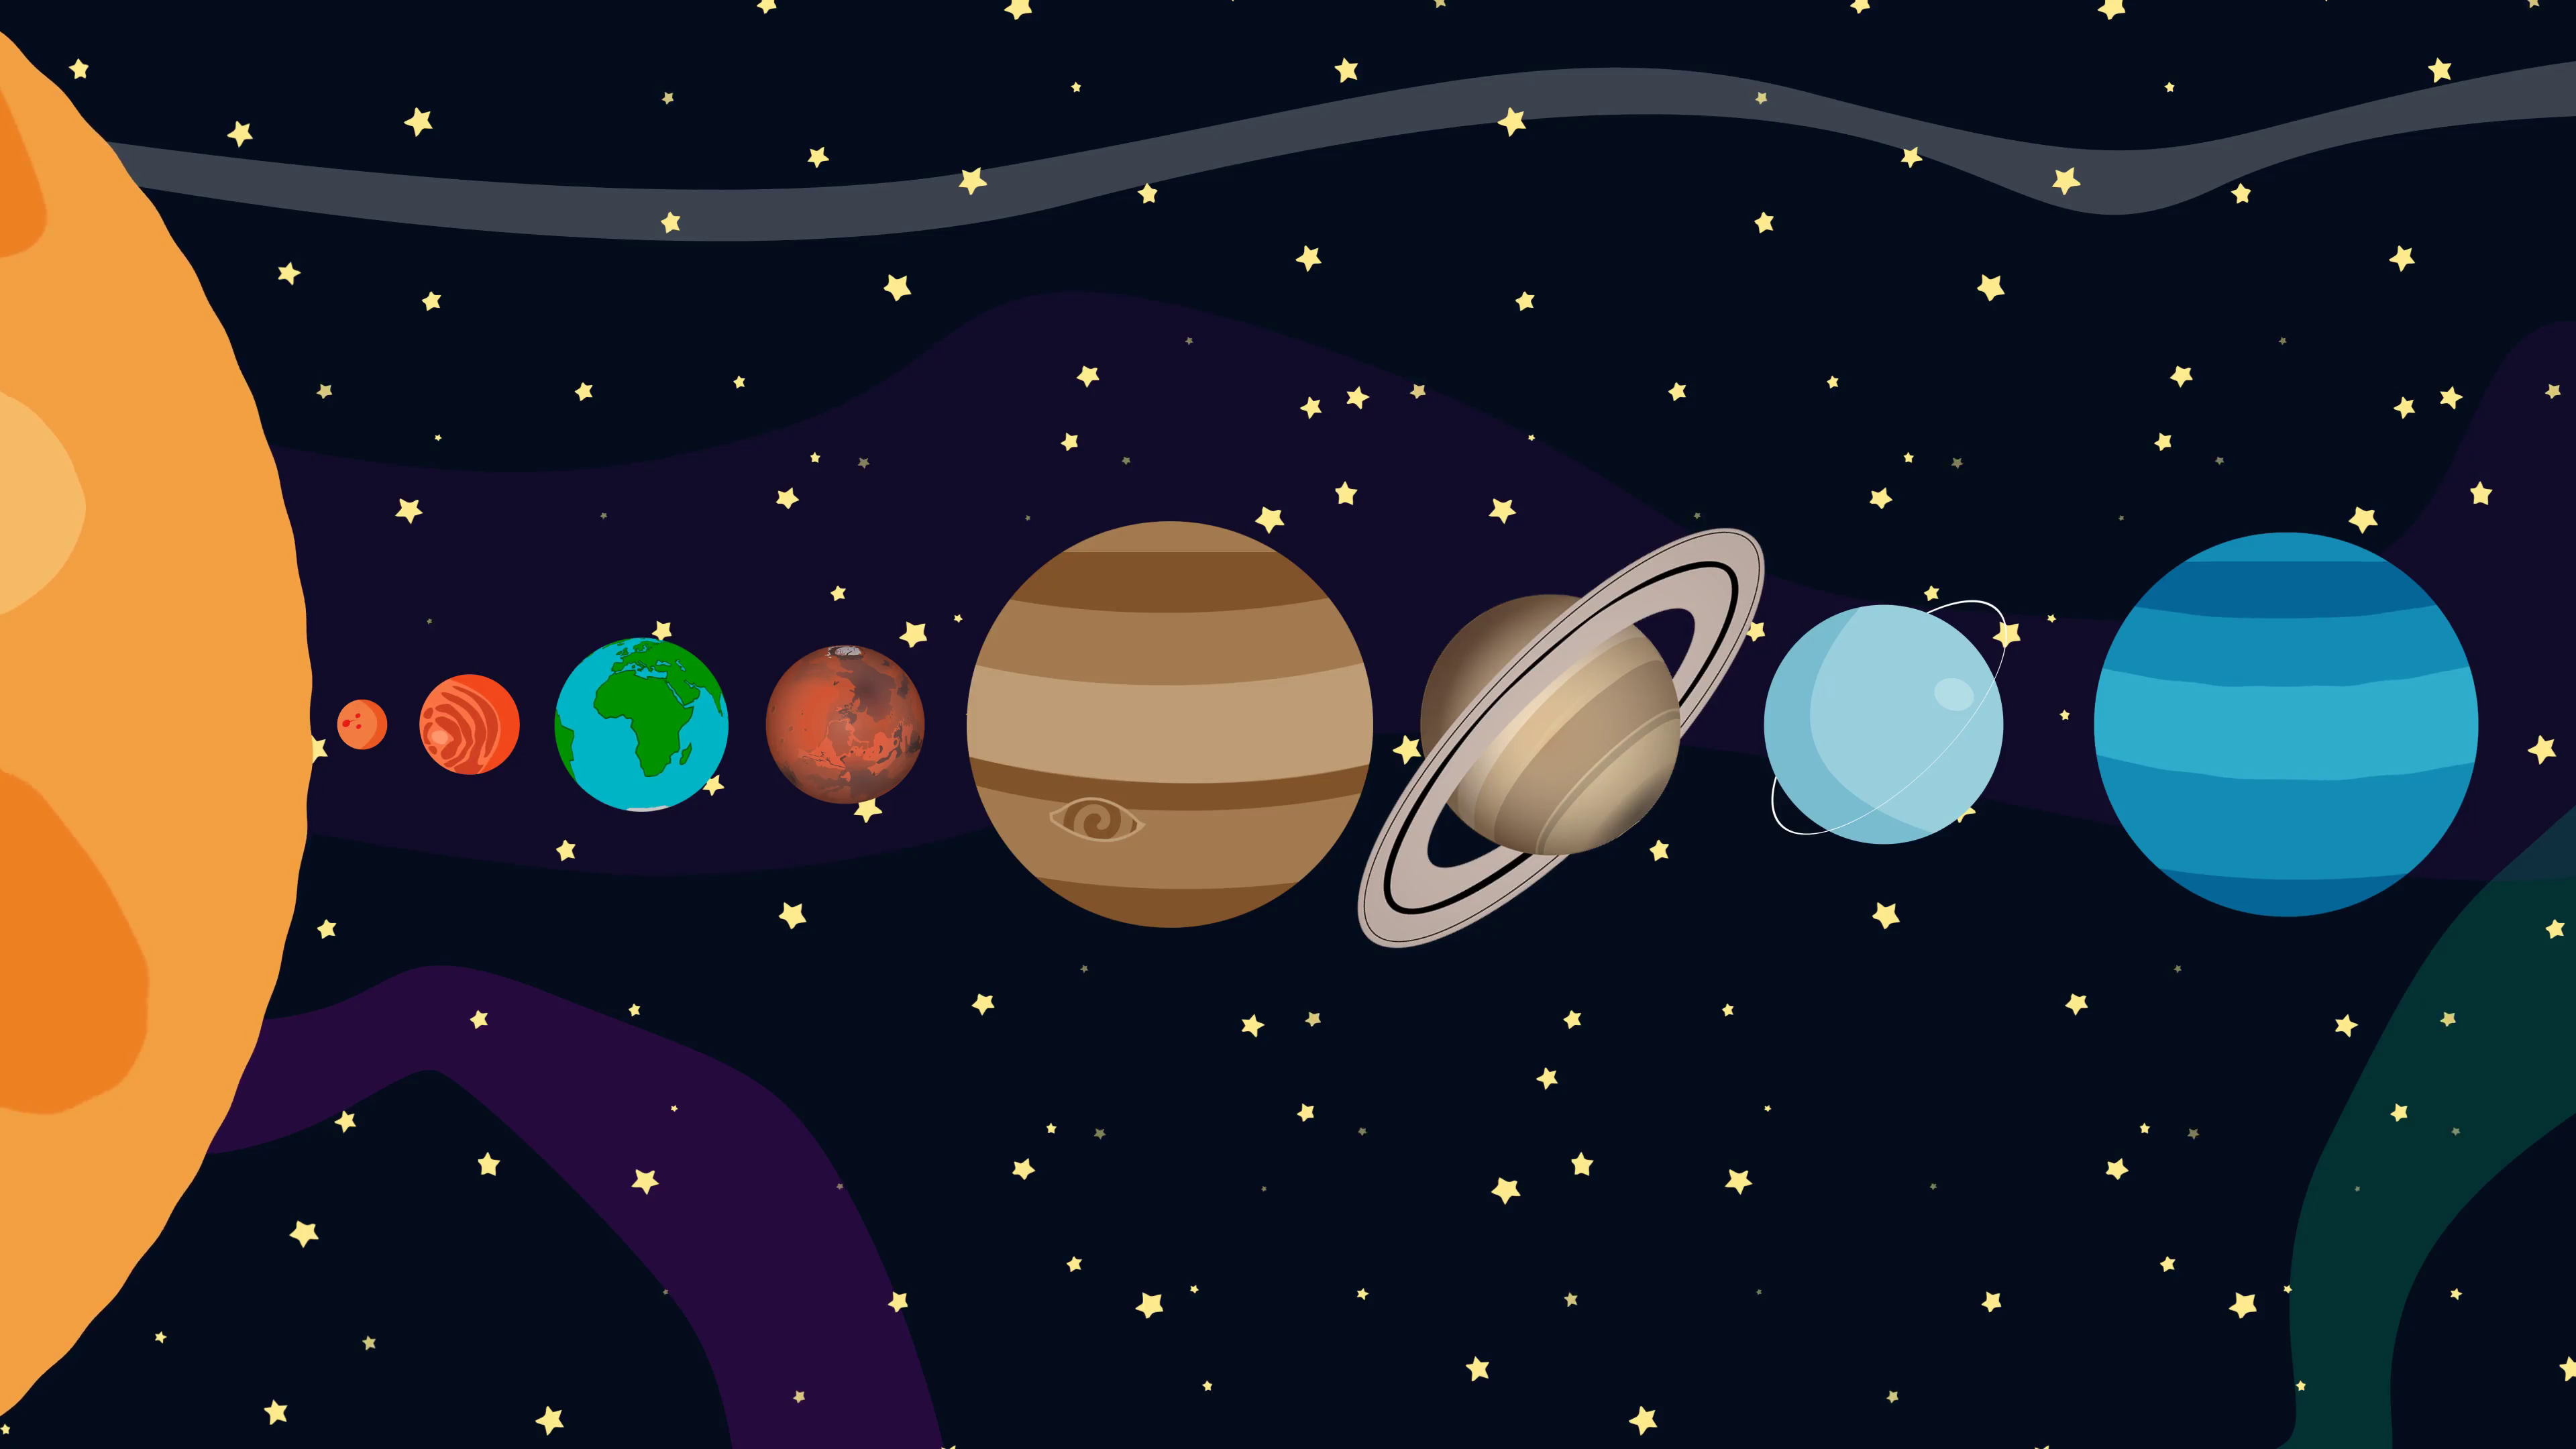 Cartoon Animation of the Planets of the Solar System By Order in 4K. 